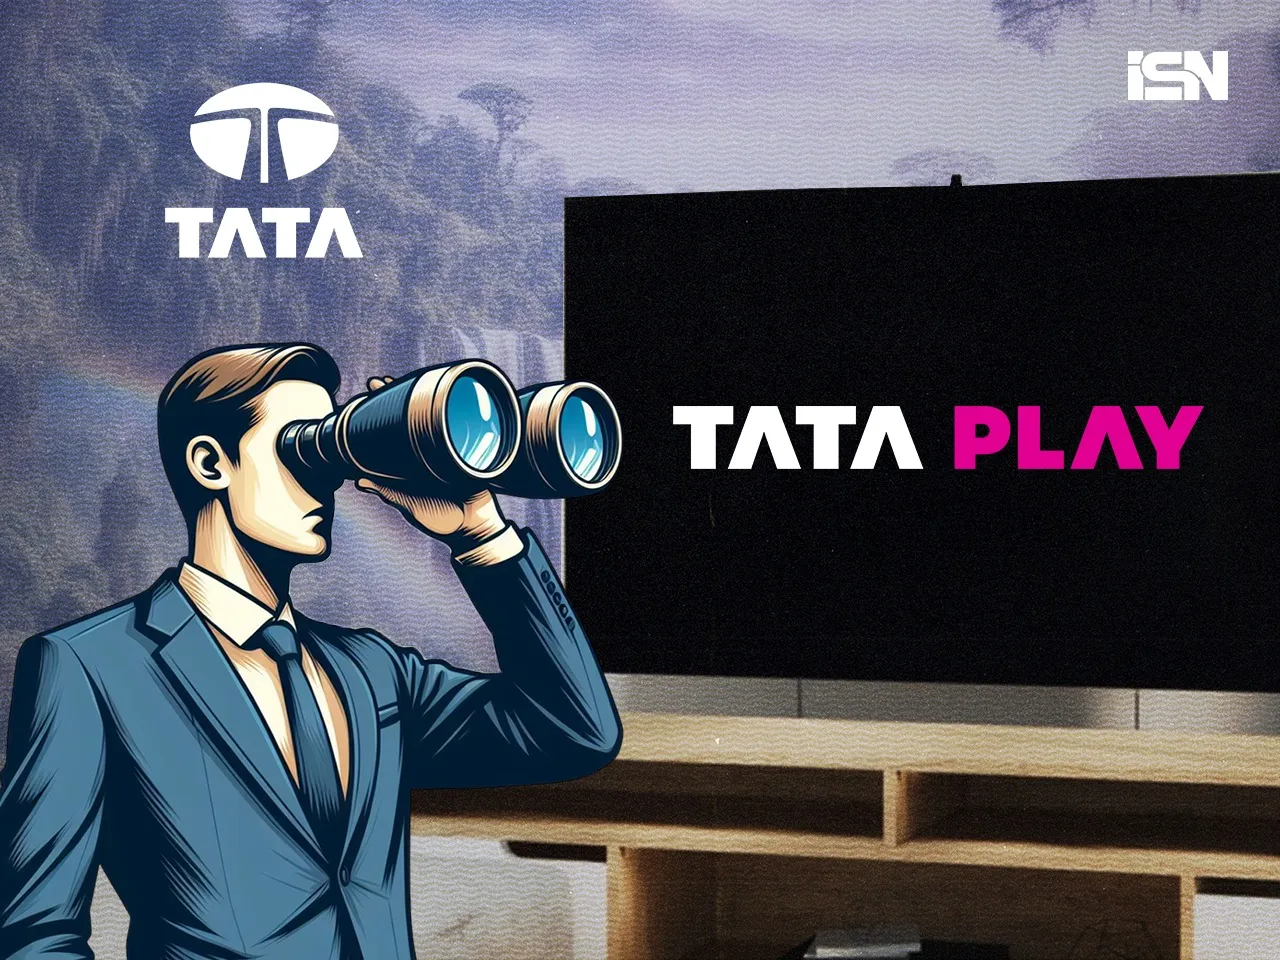 Tata Group considering to buy Disney's stake in Tata Play